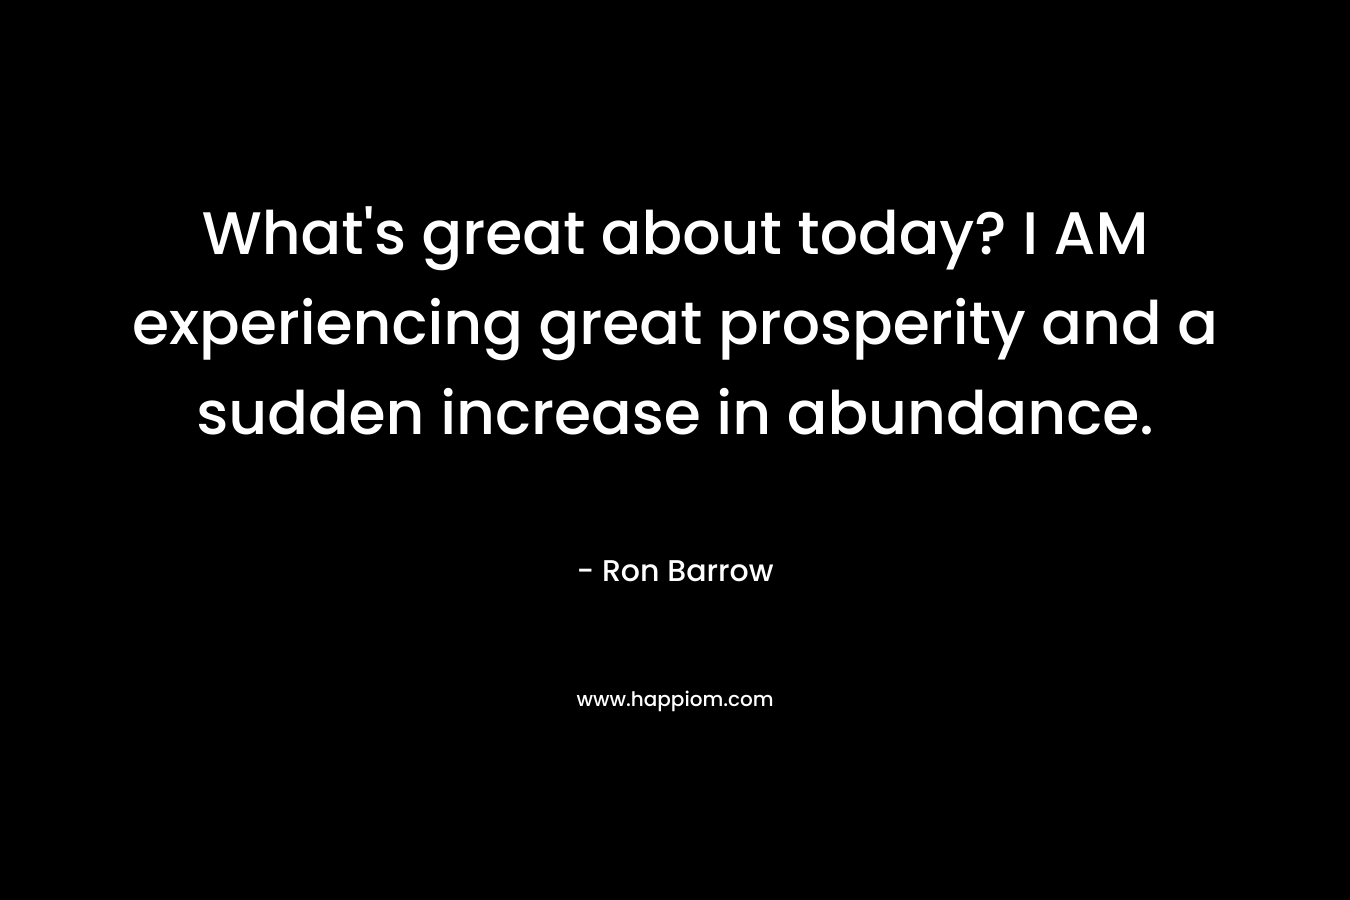 What's great about today? I AM experiencing great prosperity and a sudden increase in abundance.